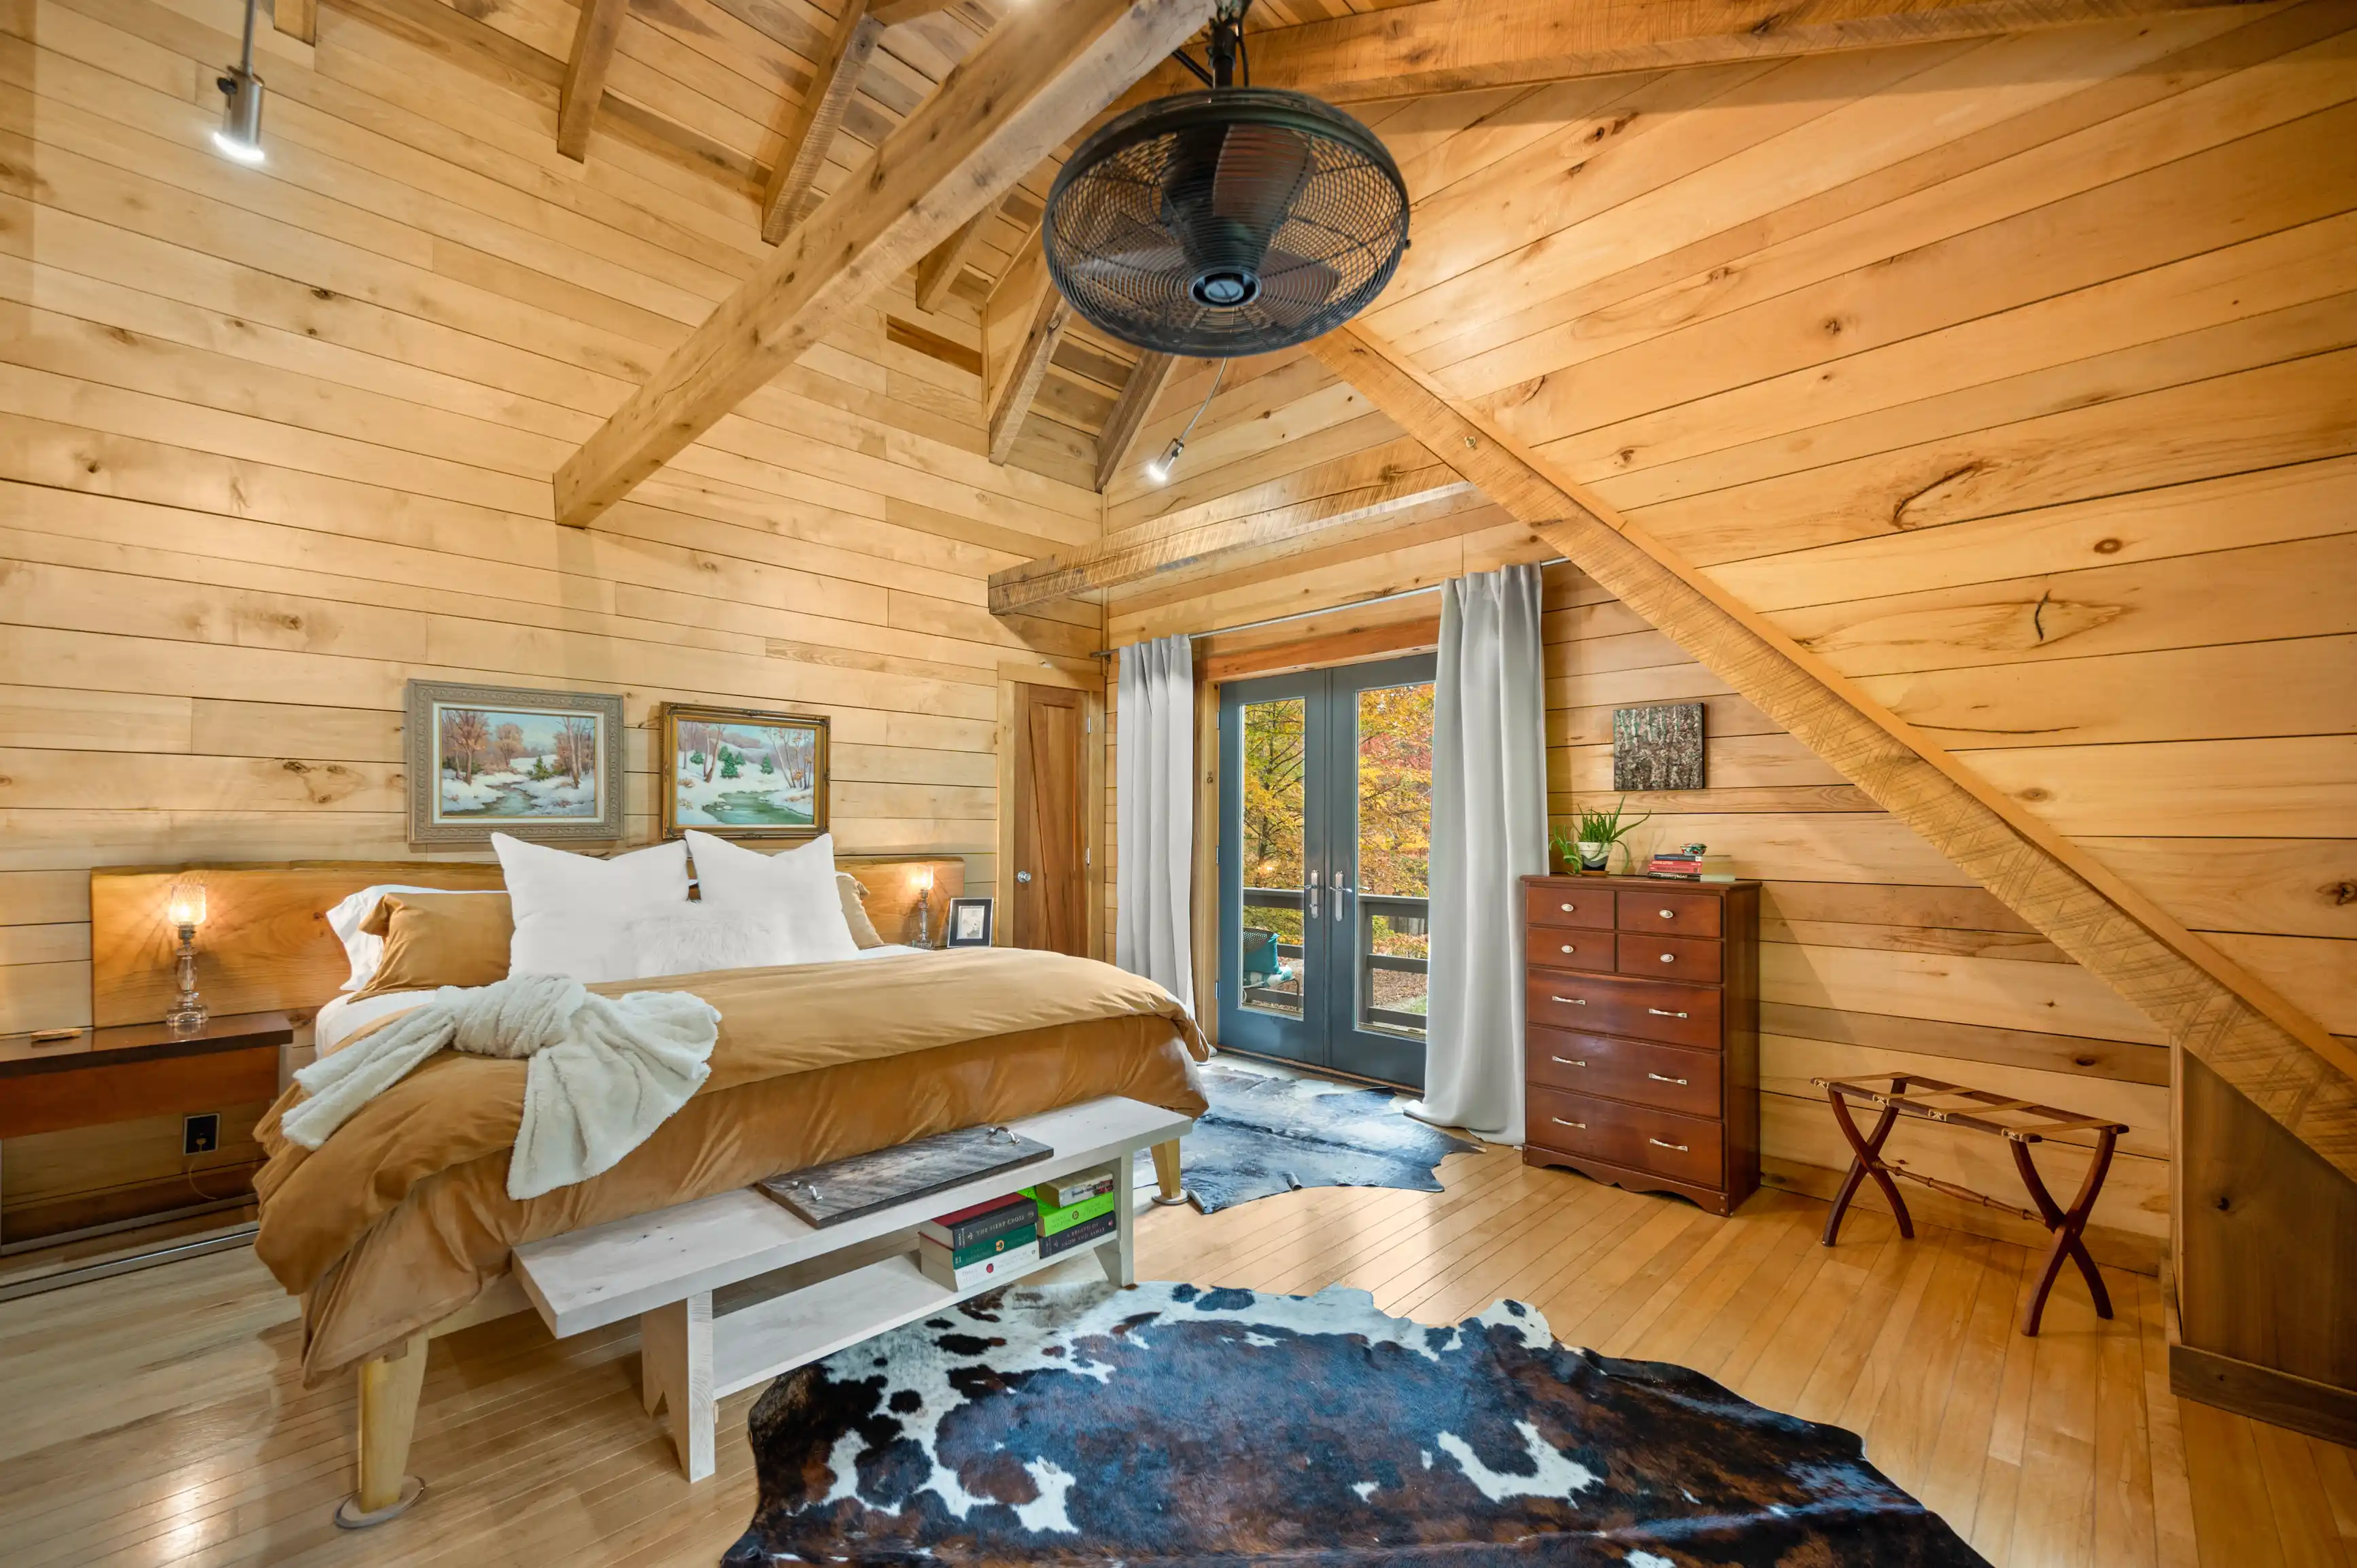 Cozy wooden cabin bedroom with a plush bed, cowhide rug, ceiling fan, and autumn view through the French doors.